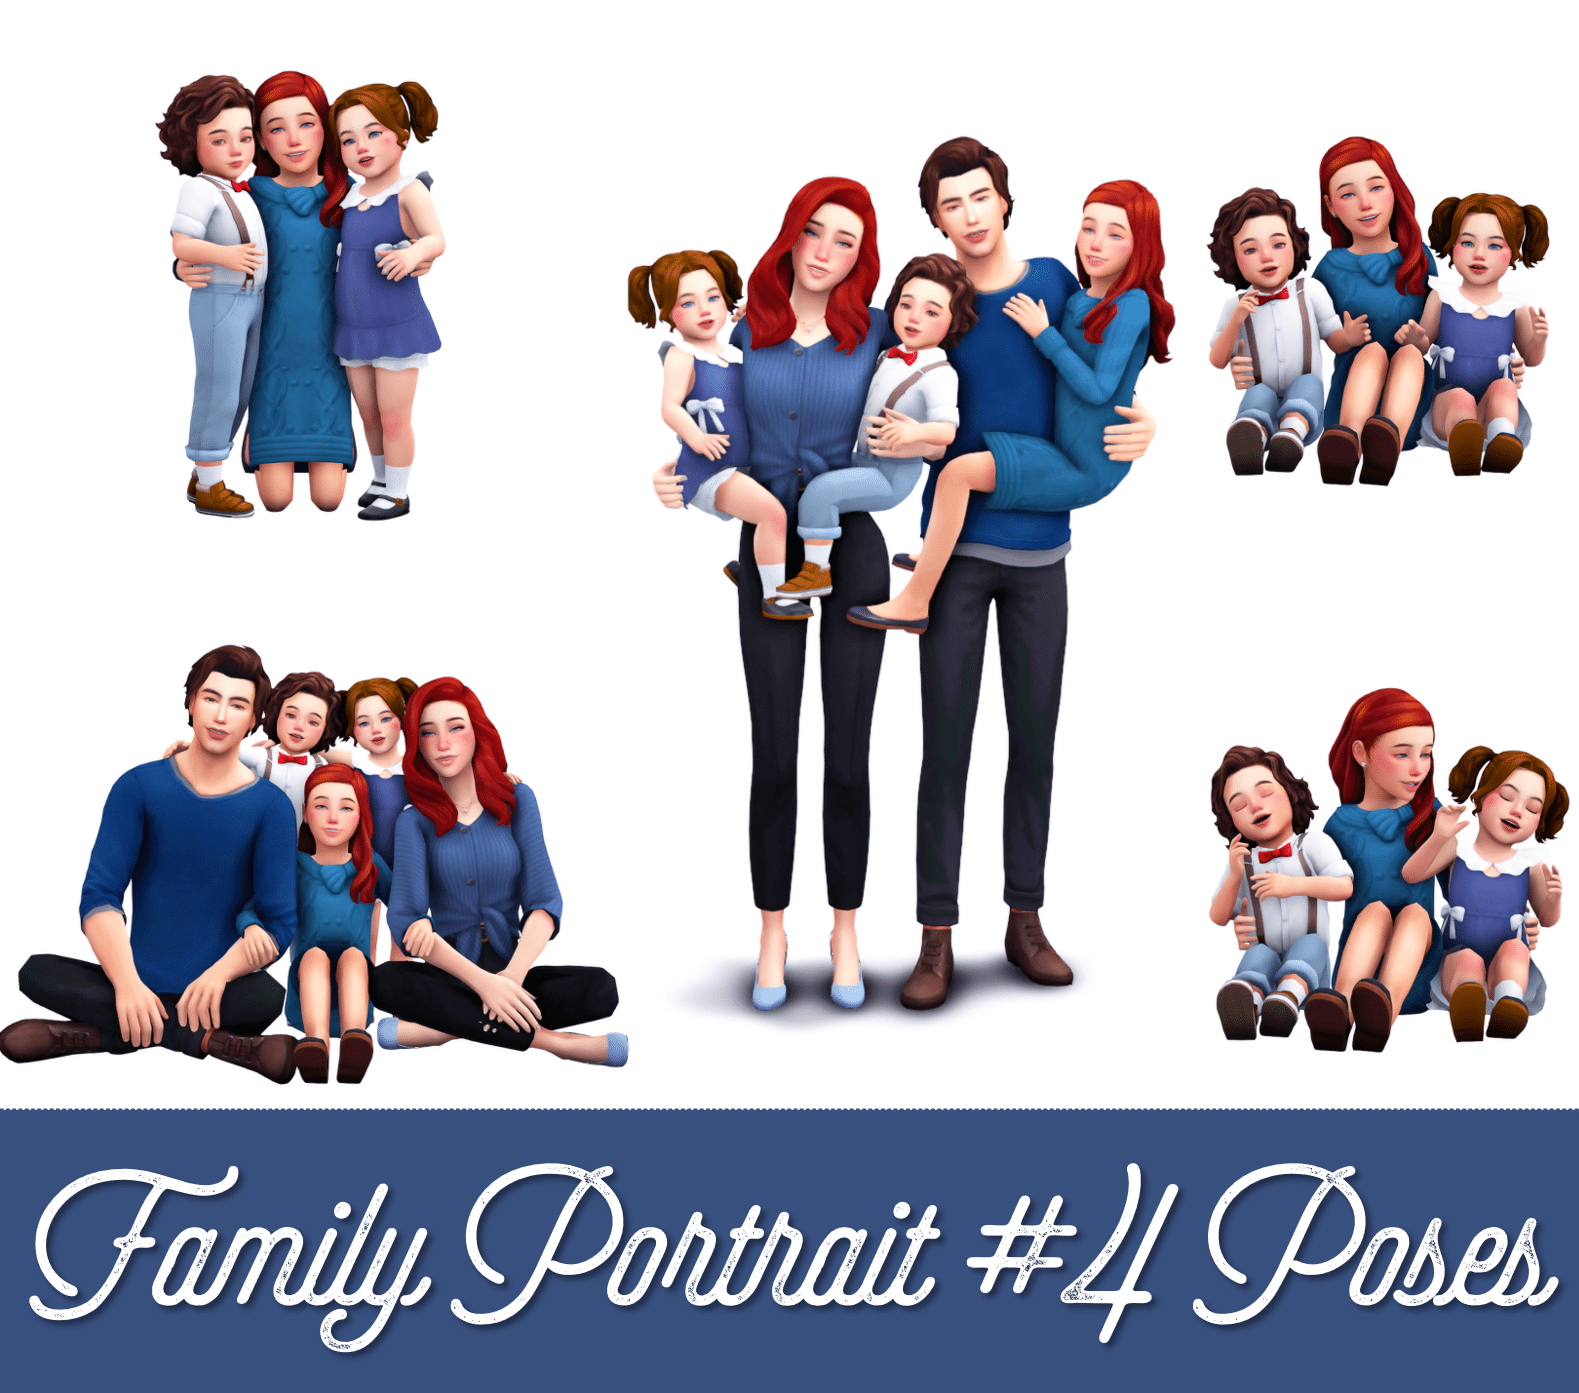 Stay at Home Sim — Victorian Family Portrait: I